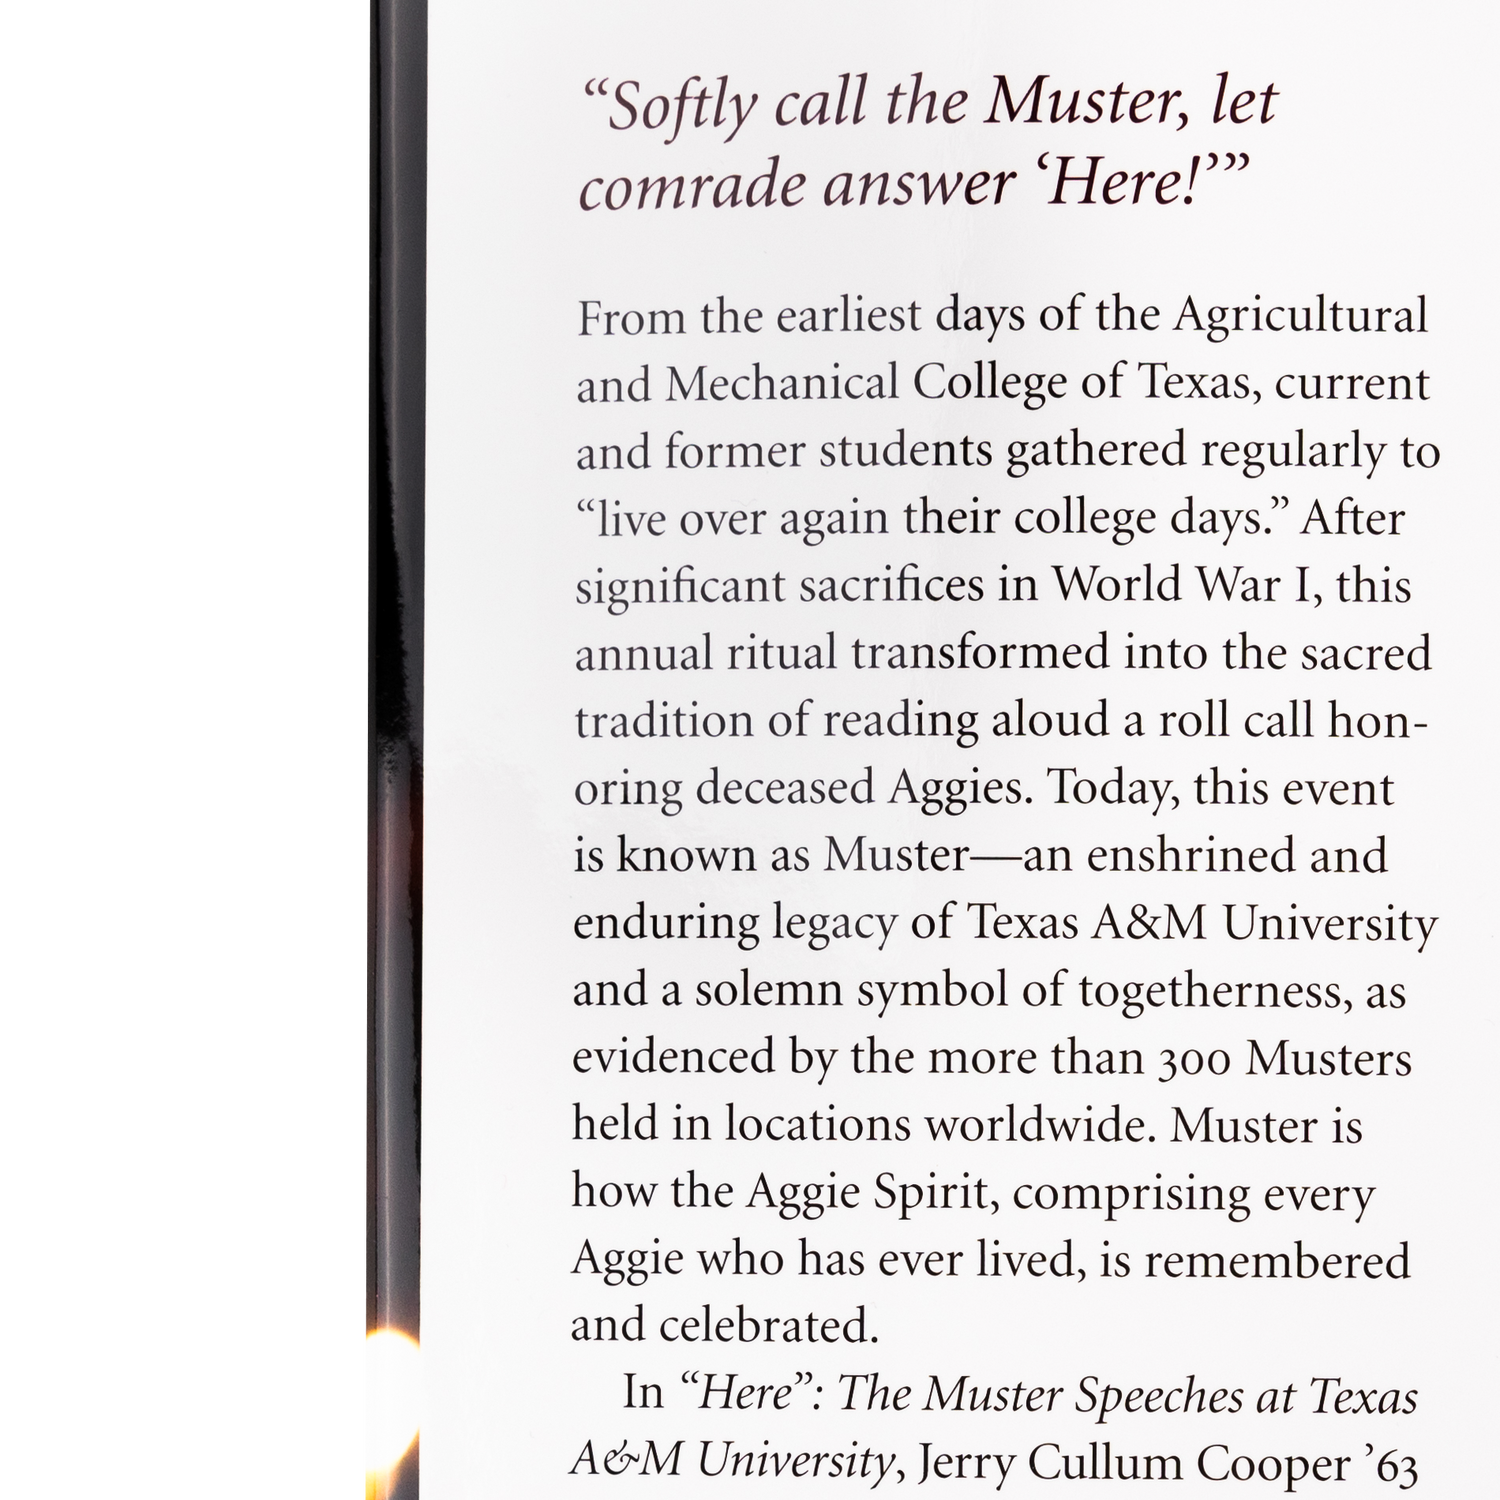 "Here": The Muster Speeches at Texas A&M Edited By Jerry Cullum Cooper